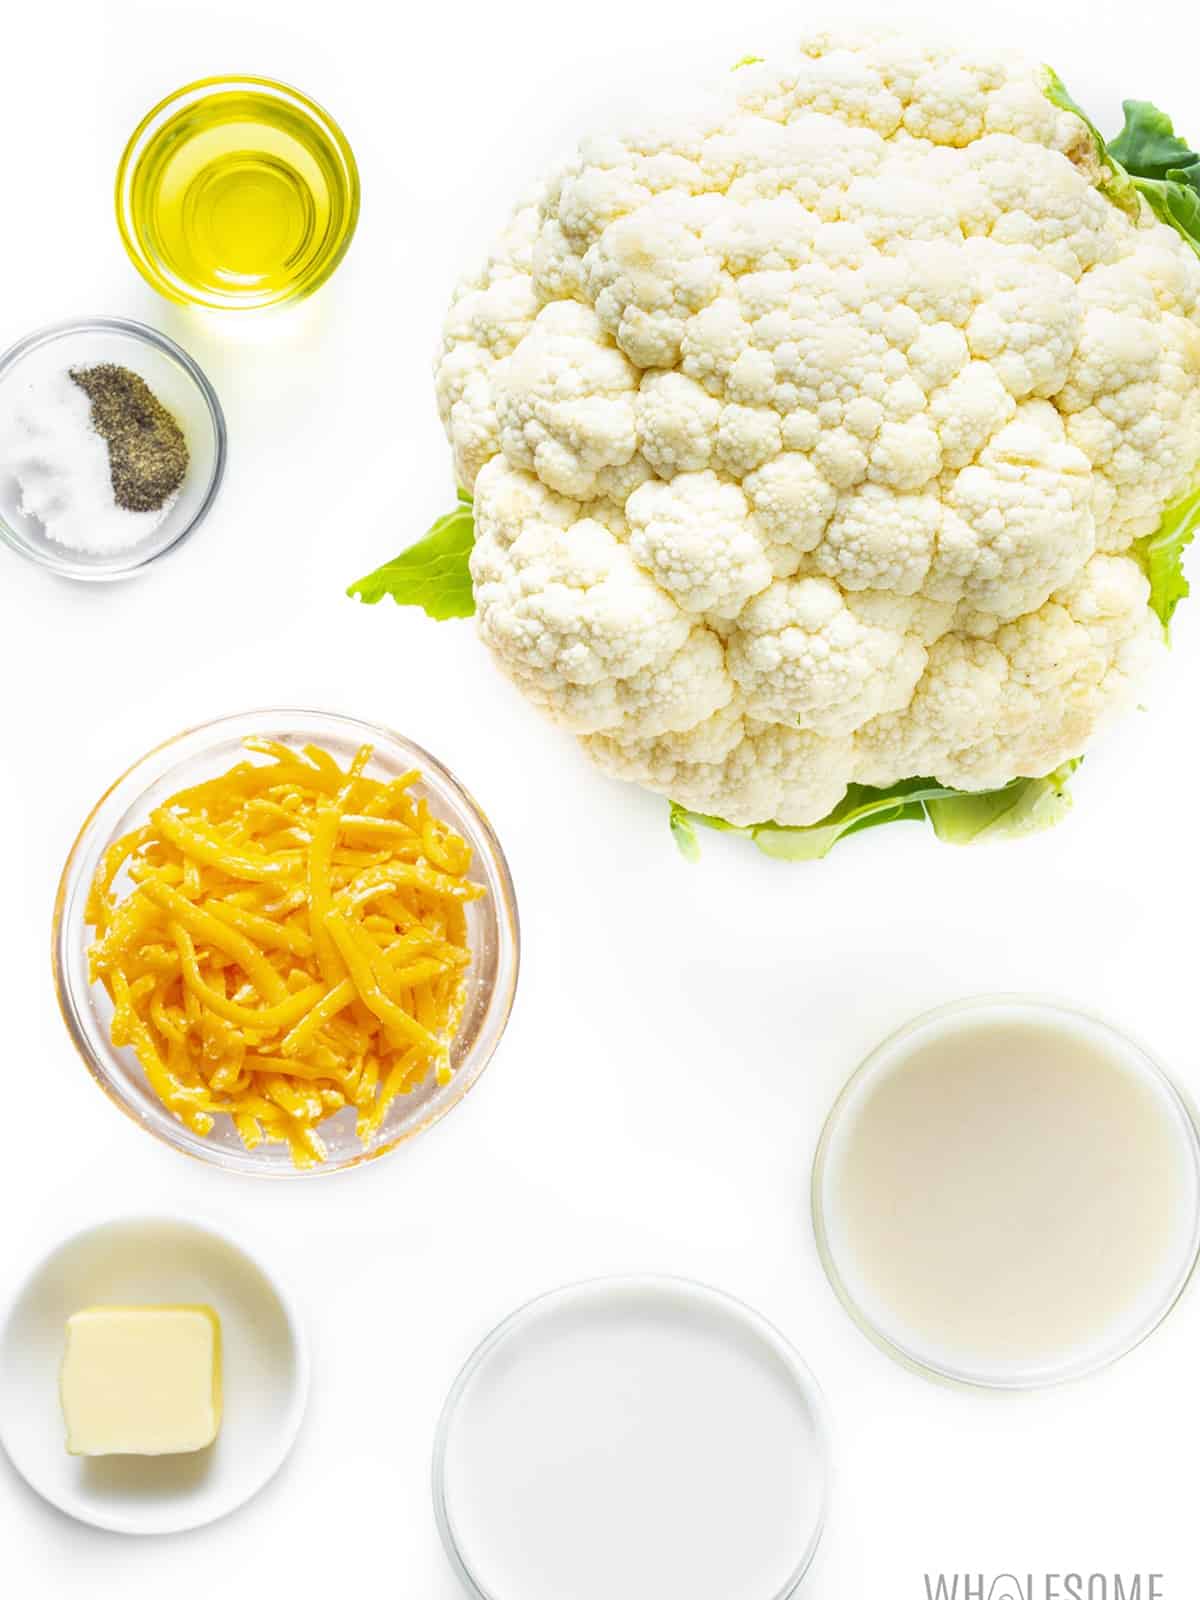 Cauliflower and cheese ingredients in bowls.